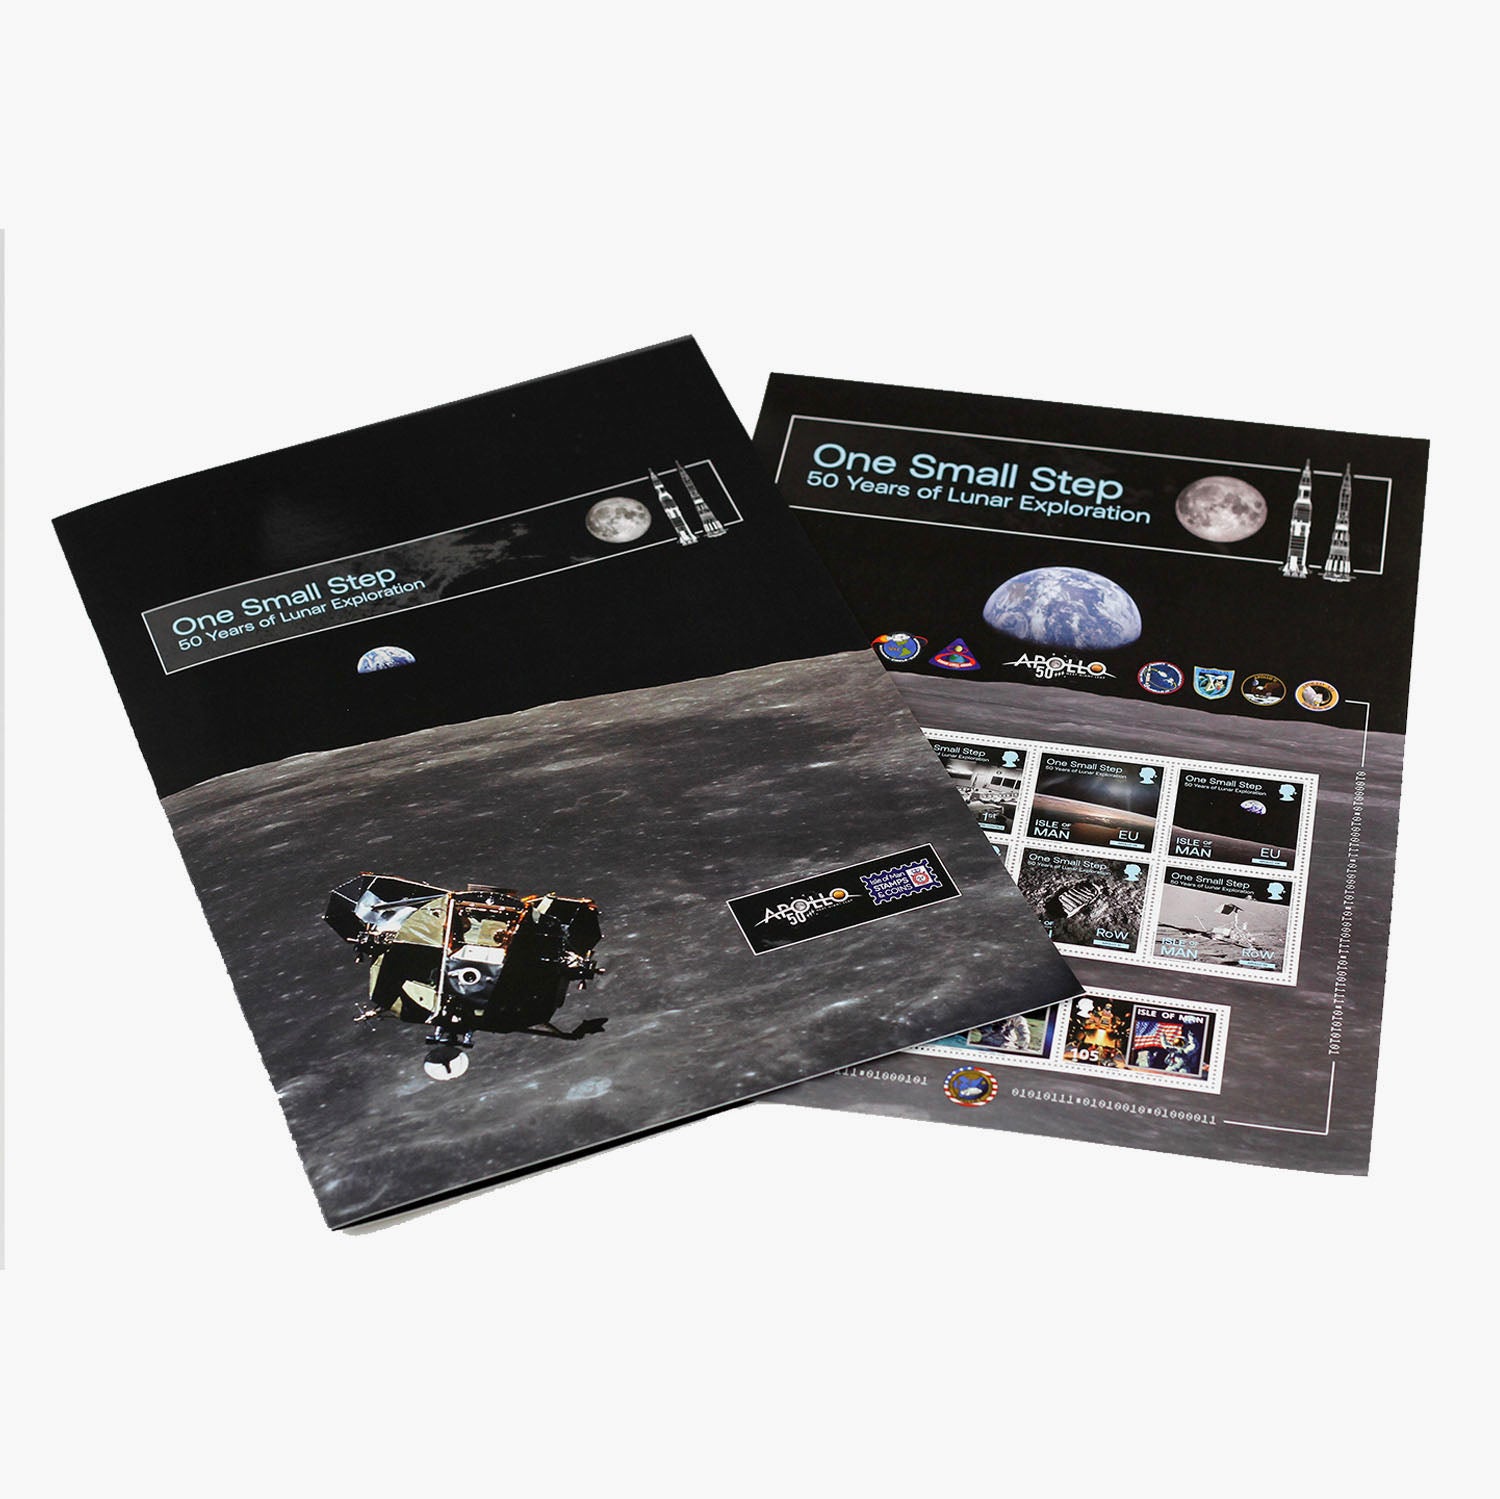 'One Small Step' 50th Anniversary of Lunar Exploration Stamps